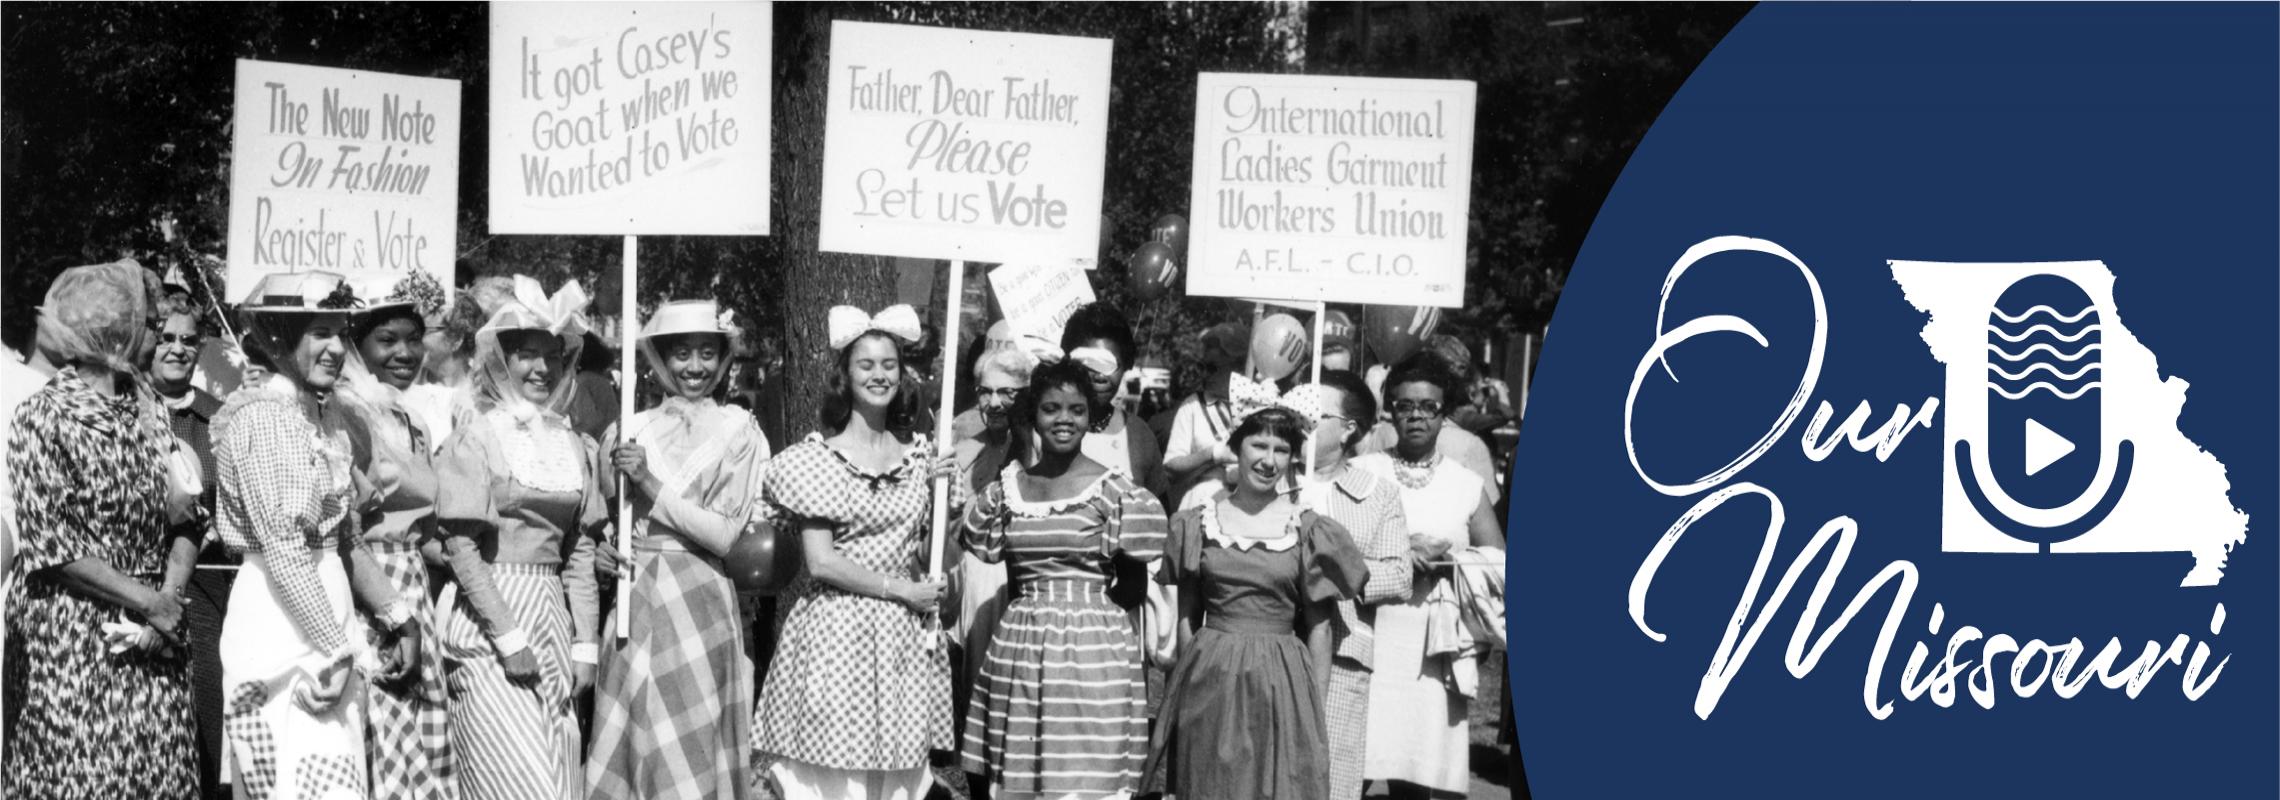 Suffrage protest